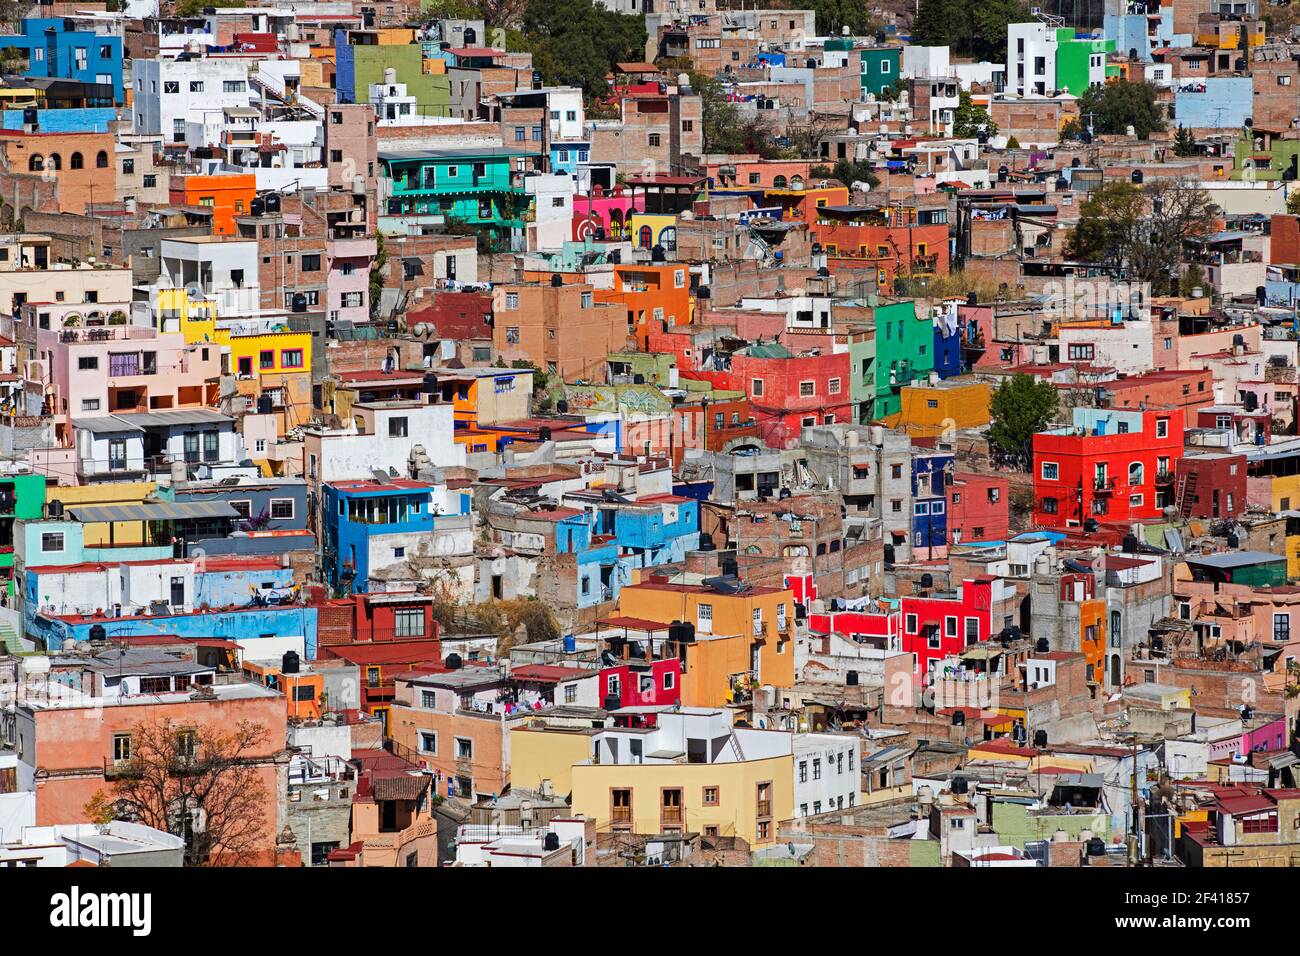 Aerial view over the rooftops of houses in city centre of Guanajuato, Central Mexico Stock Photo